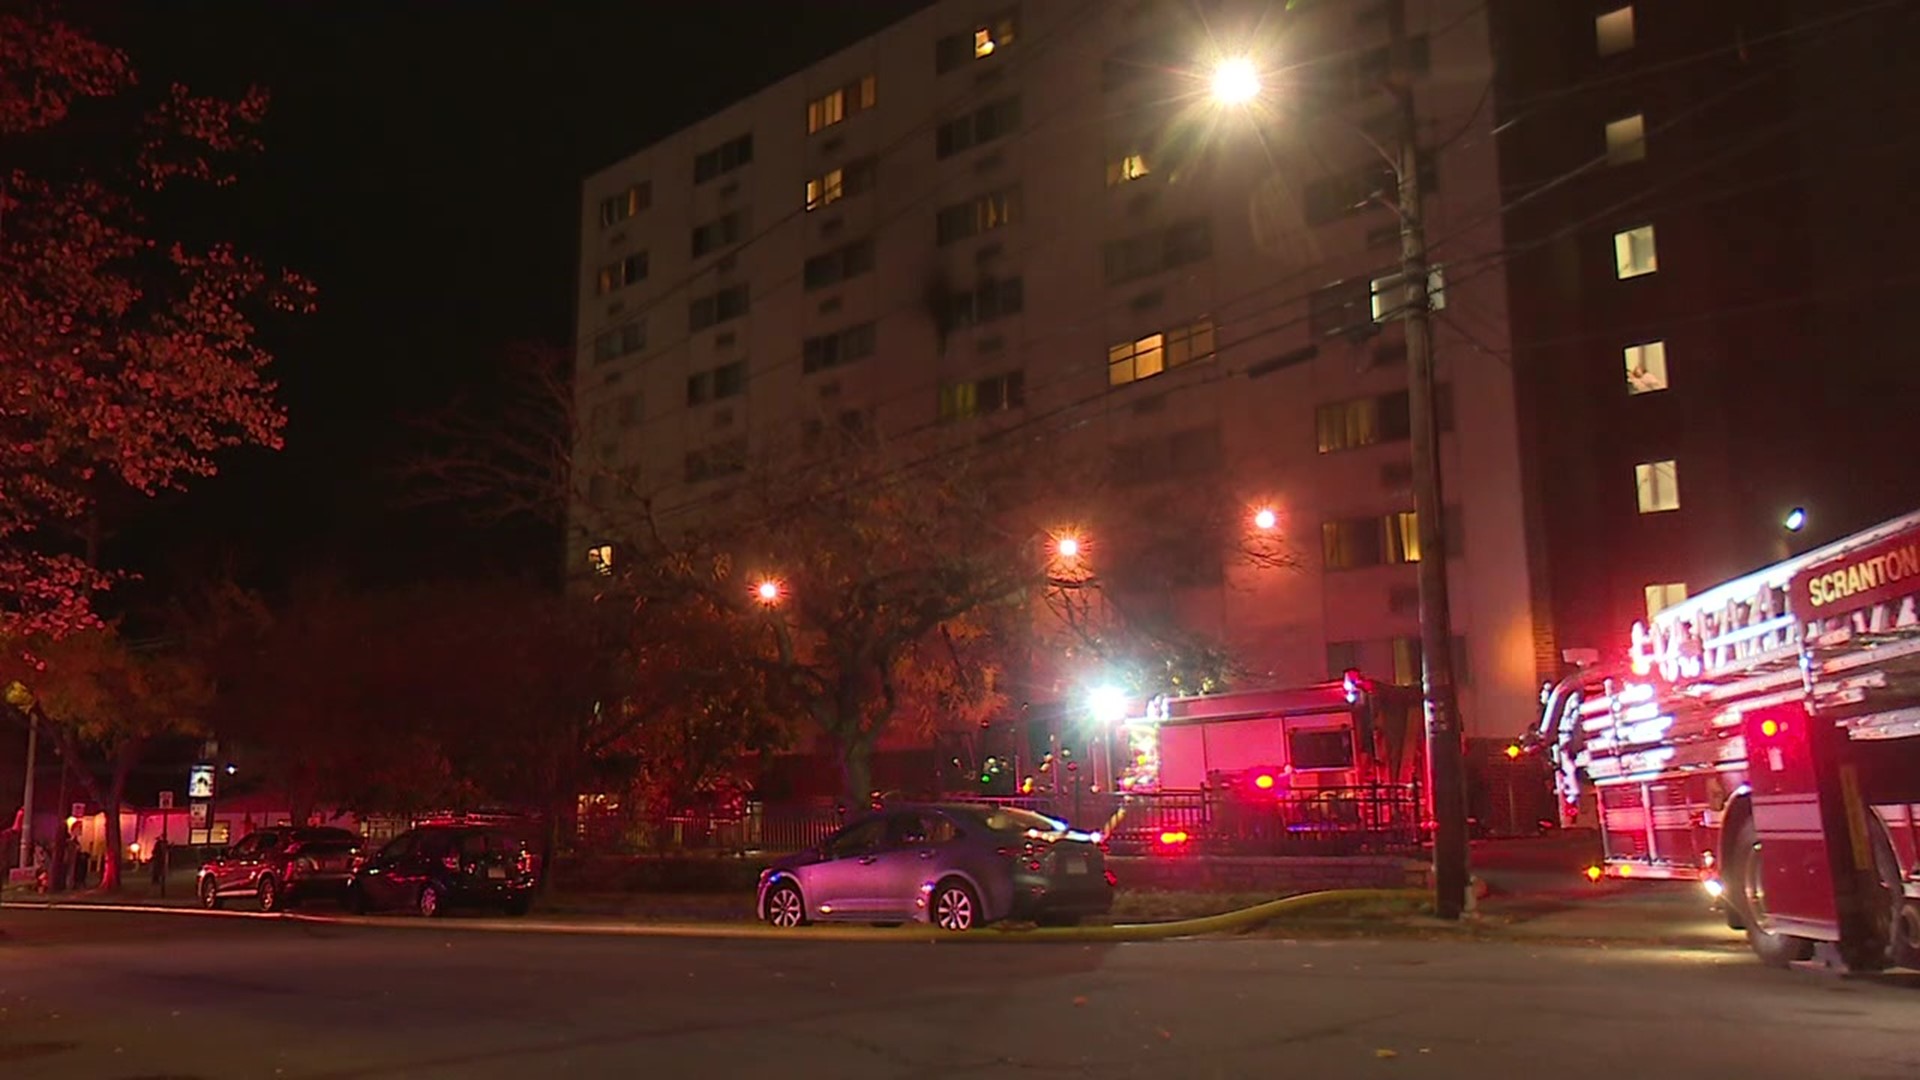 A fire at United House Apartments killed one man, injured two others, and forced more than 100 people from their homes.